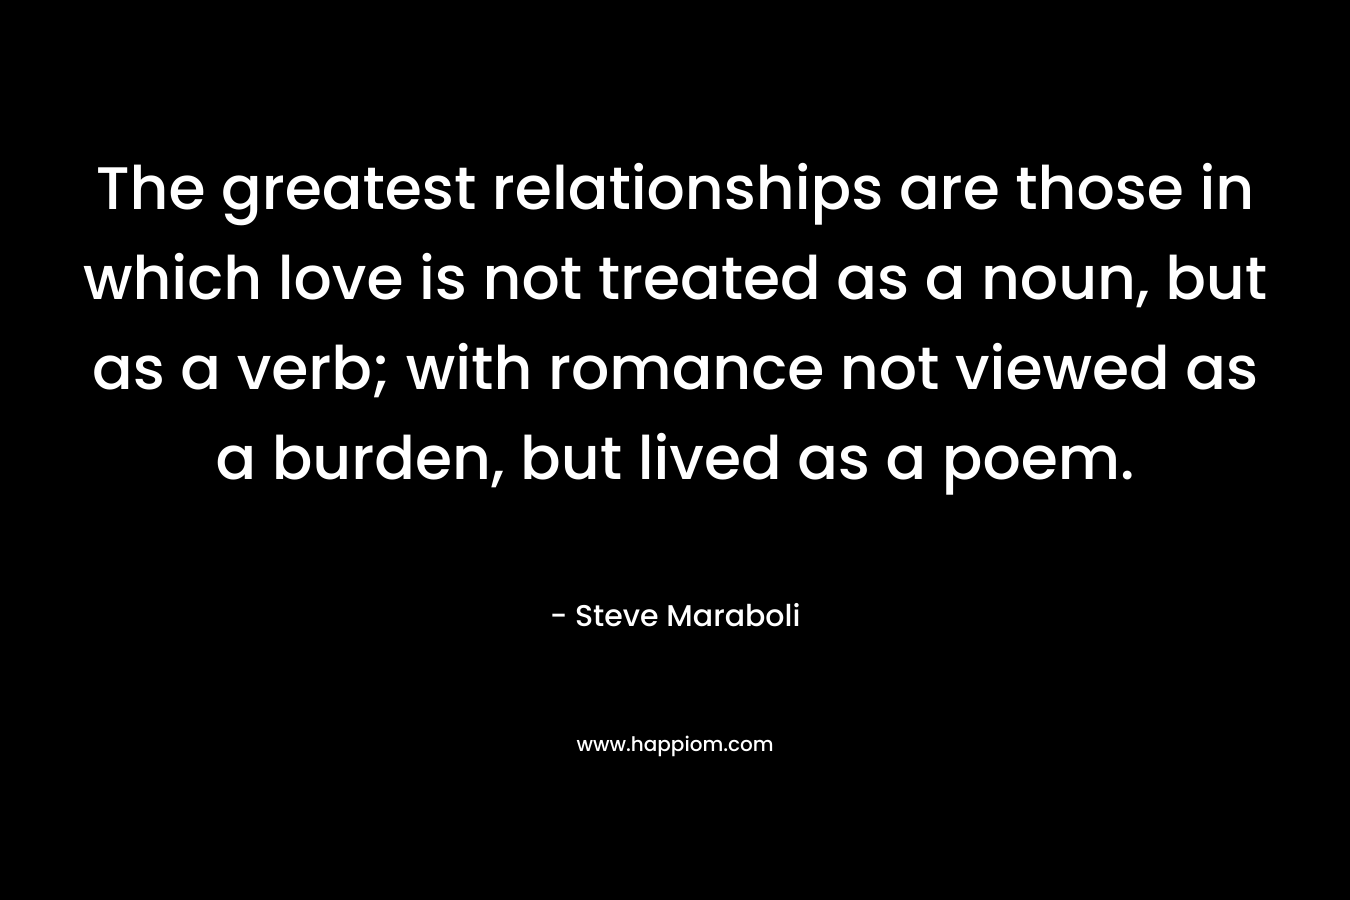 The greatest relationships are those in which love is not treated as a noun, but as a verb; with romance not viewed as a burden, but lived as a poem.